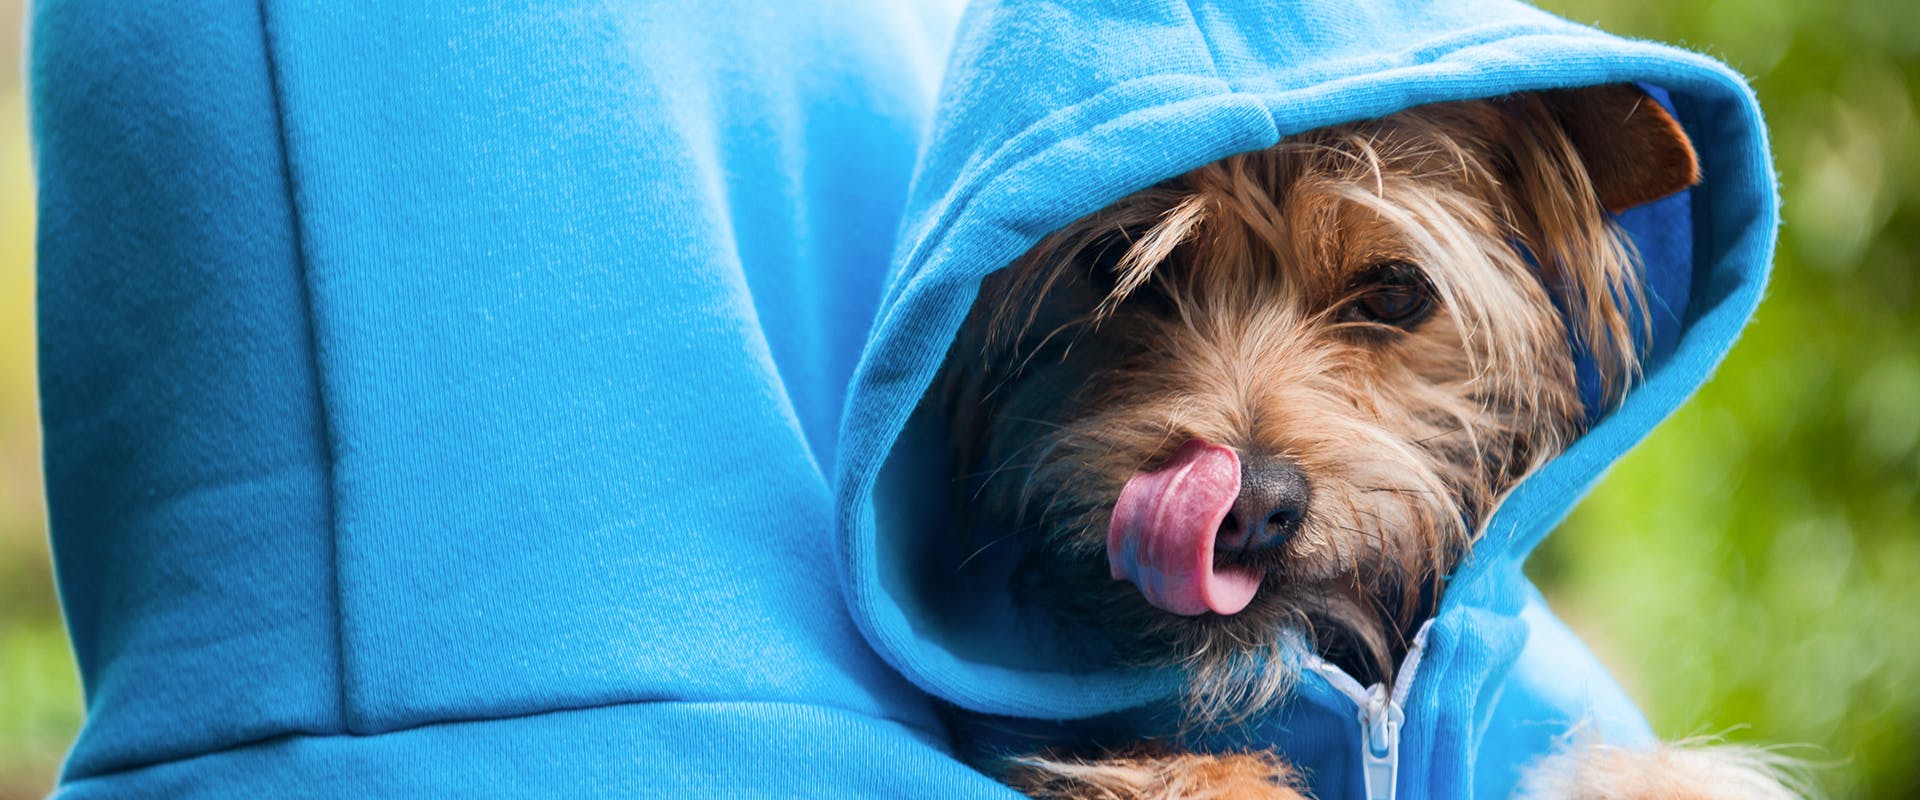 A person in a bright blue hoody holding a small Chorkie dog